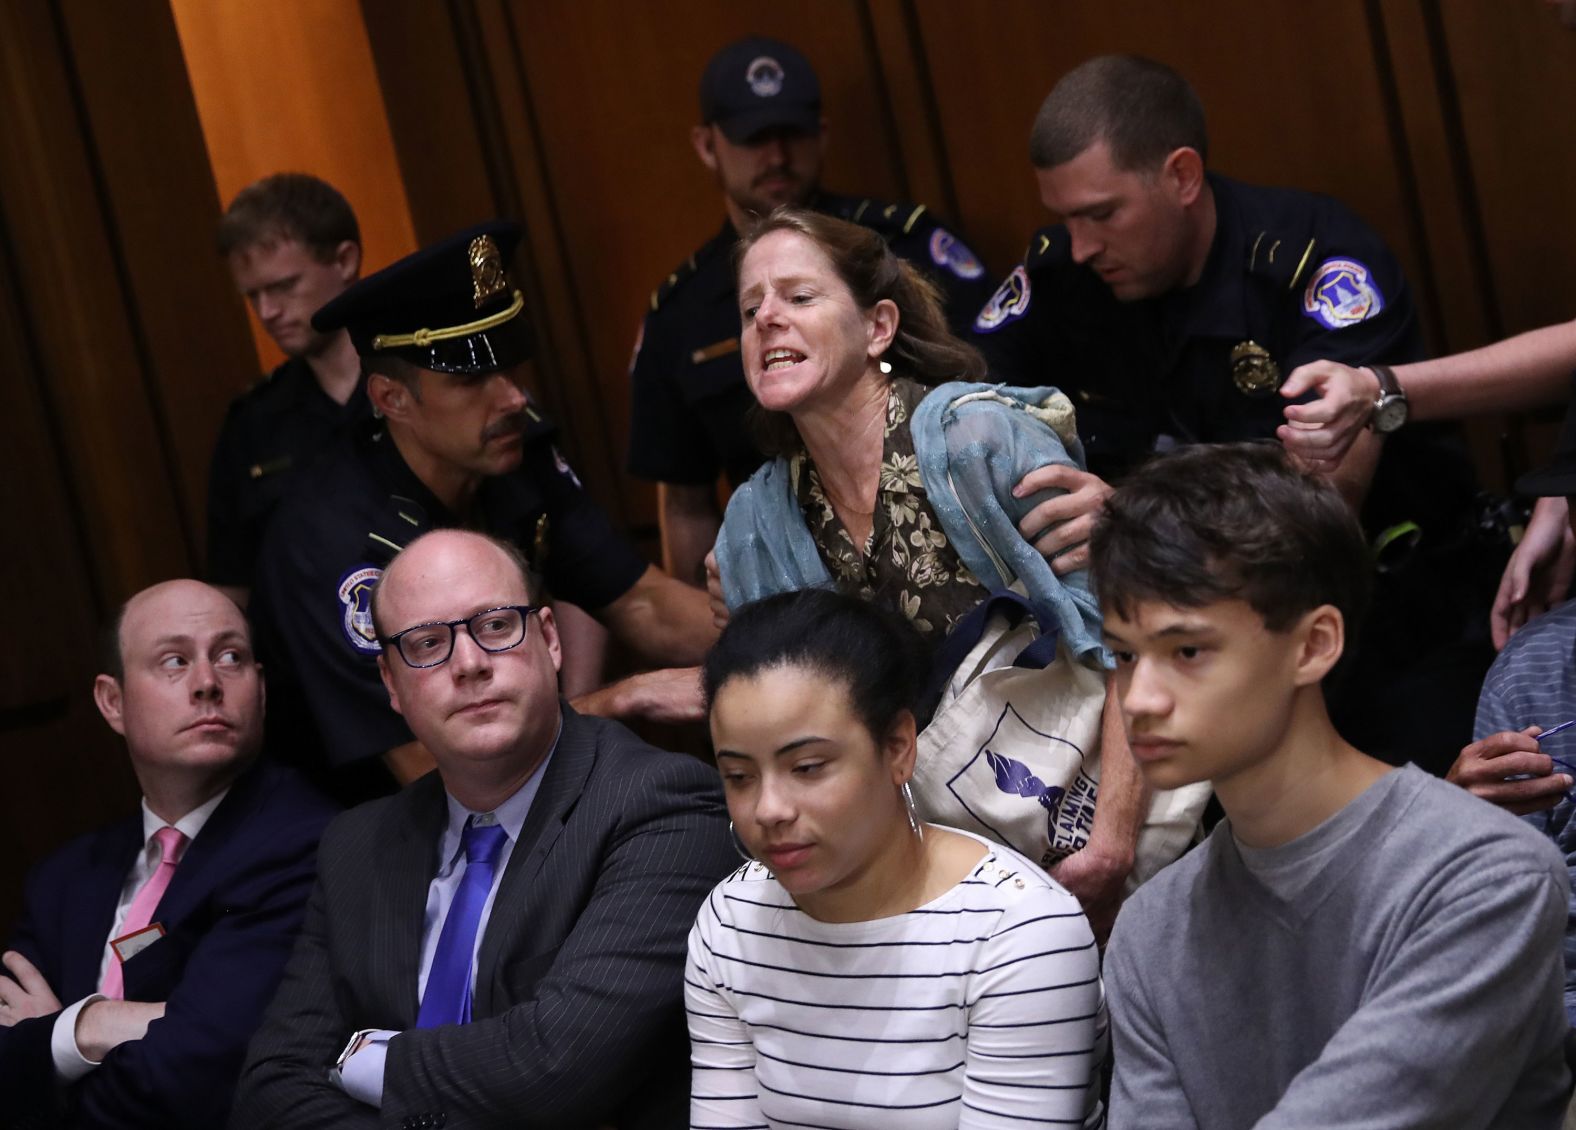 Police remove a protester disrupting the hearing on Wednesday. Capitol Police said <a href="index.php?page=&url=https%3A%2F%2Fwww.cnn.com%2F2018%2F09%2F04%2Fpolitics%2Fcapitol-hill-police-protest-arrests%2Findex.html" target="_blank">they arrested 70 people</a> on Tuesday.